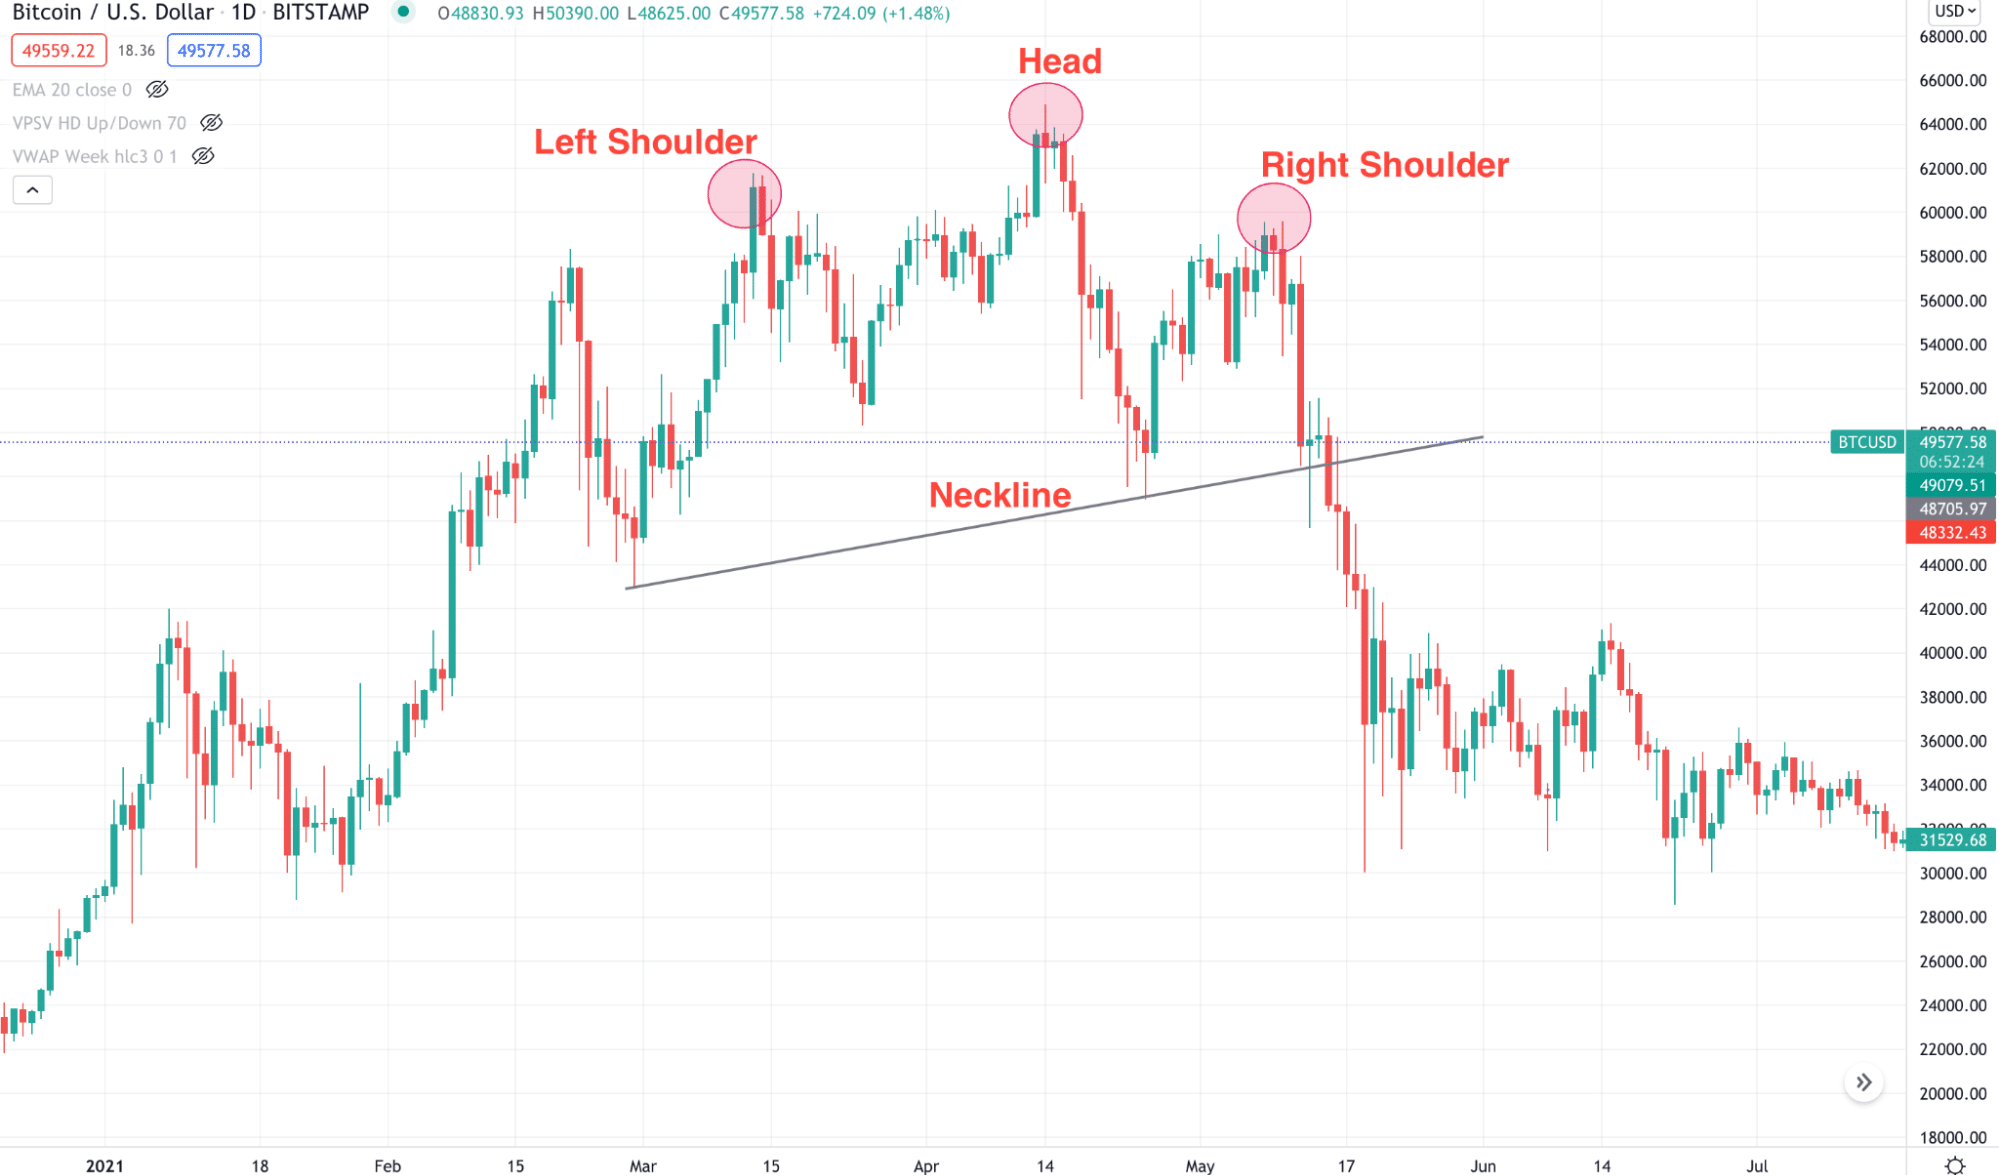 BTC/USD head and shoulder pattern